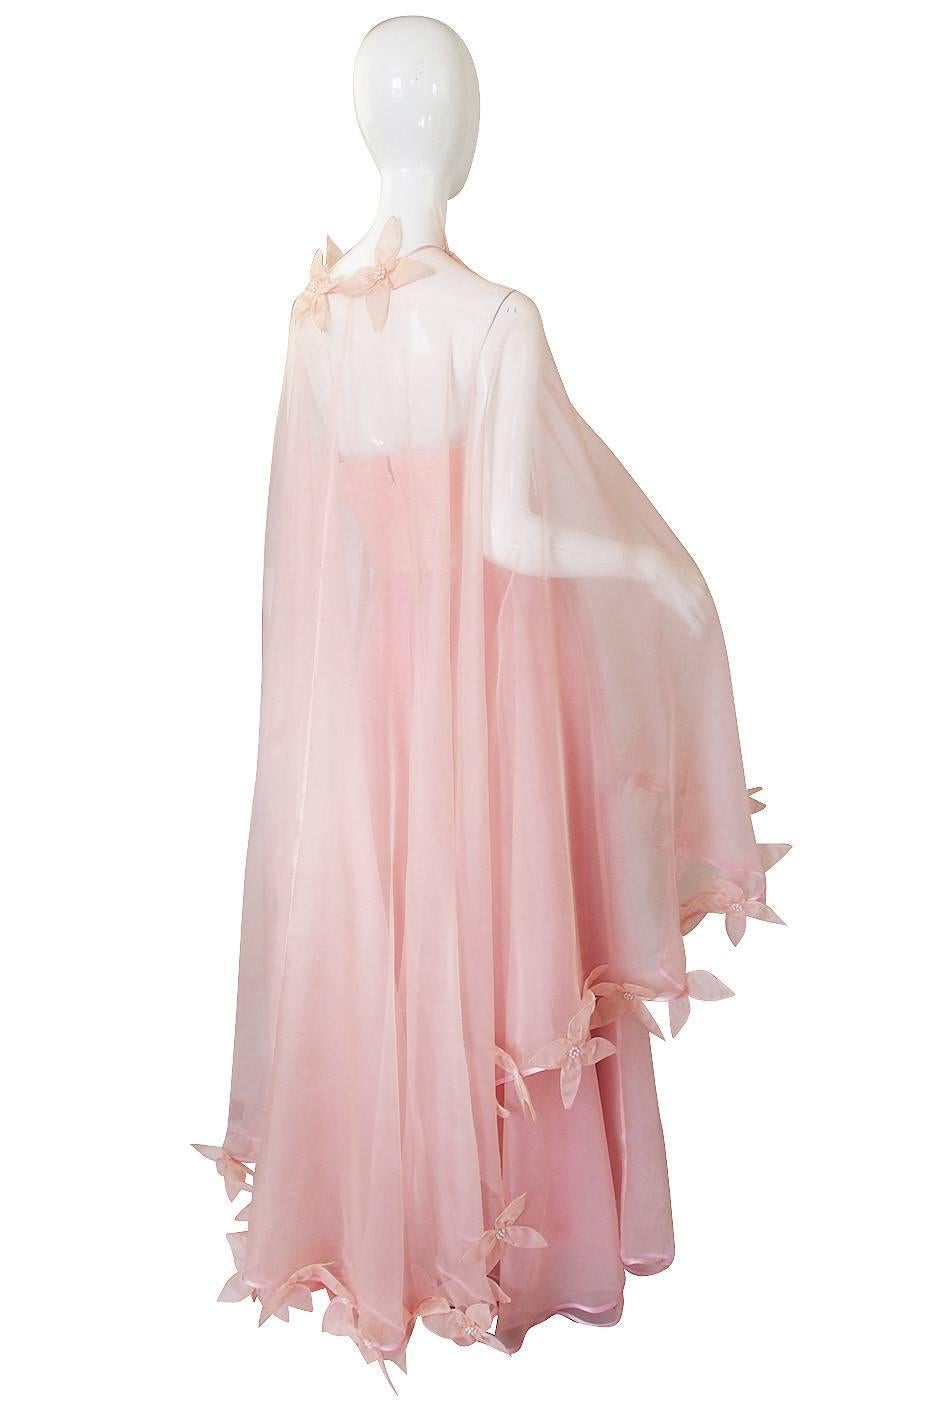 Beige Dramatic 1975 Loris Azzaro Couture Pink Silk Gown & Cape